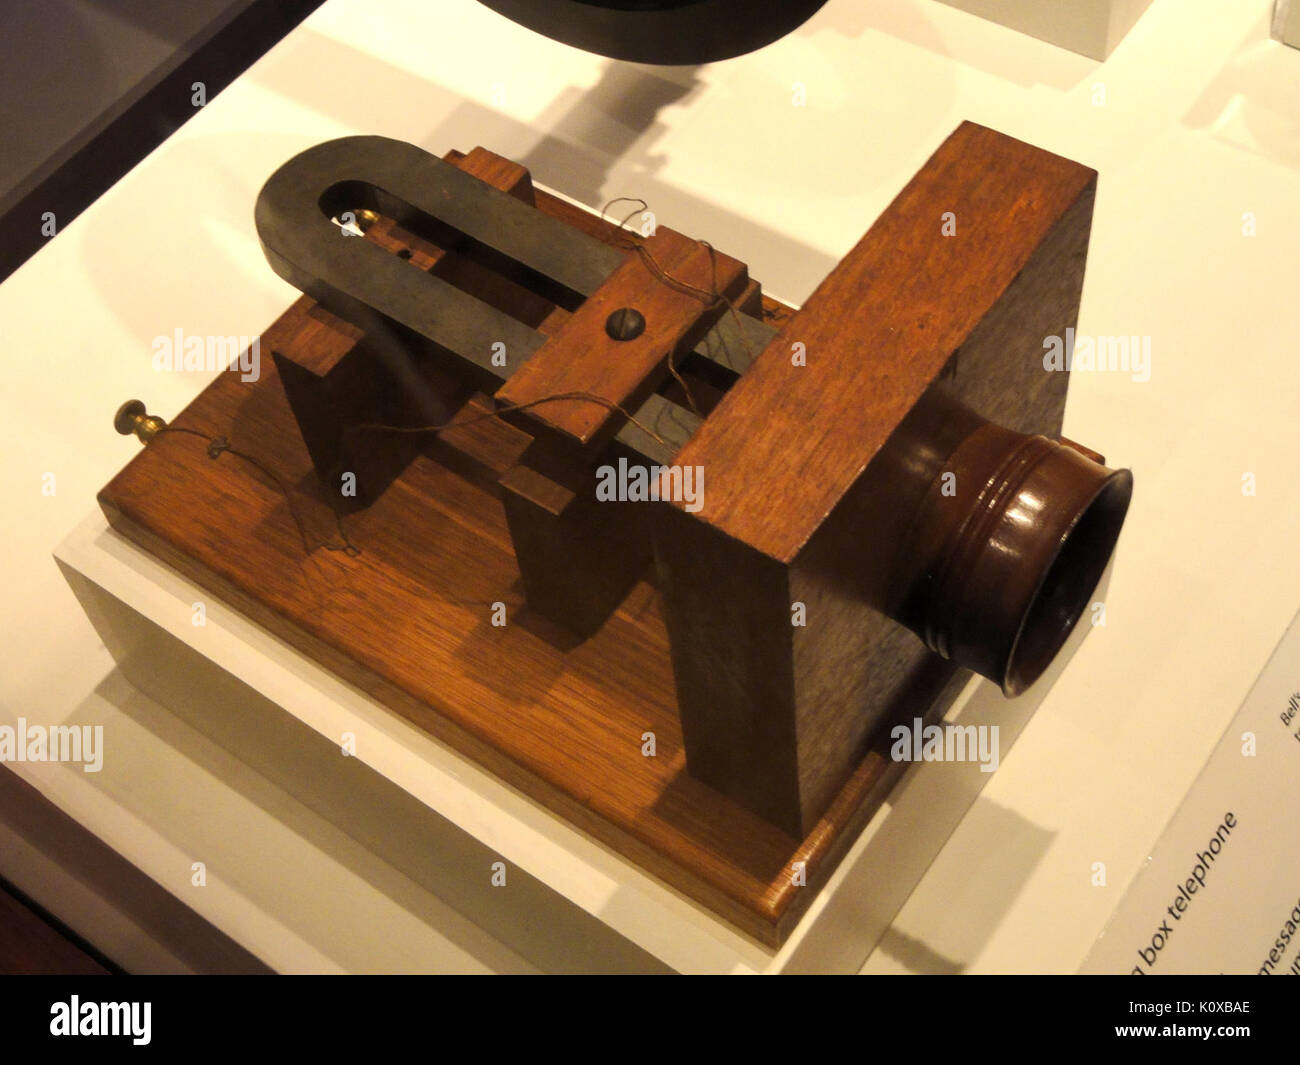 Alexander Graham Bell's big box telephone, 1876, one of the first commercially available telephones   National Museum of American History   DSC06223 Stock Photo